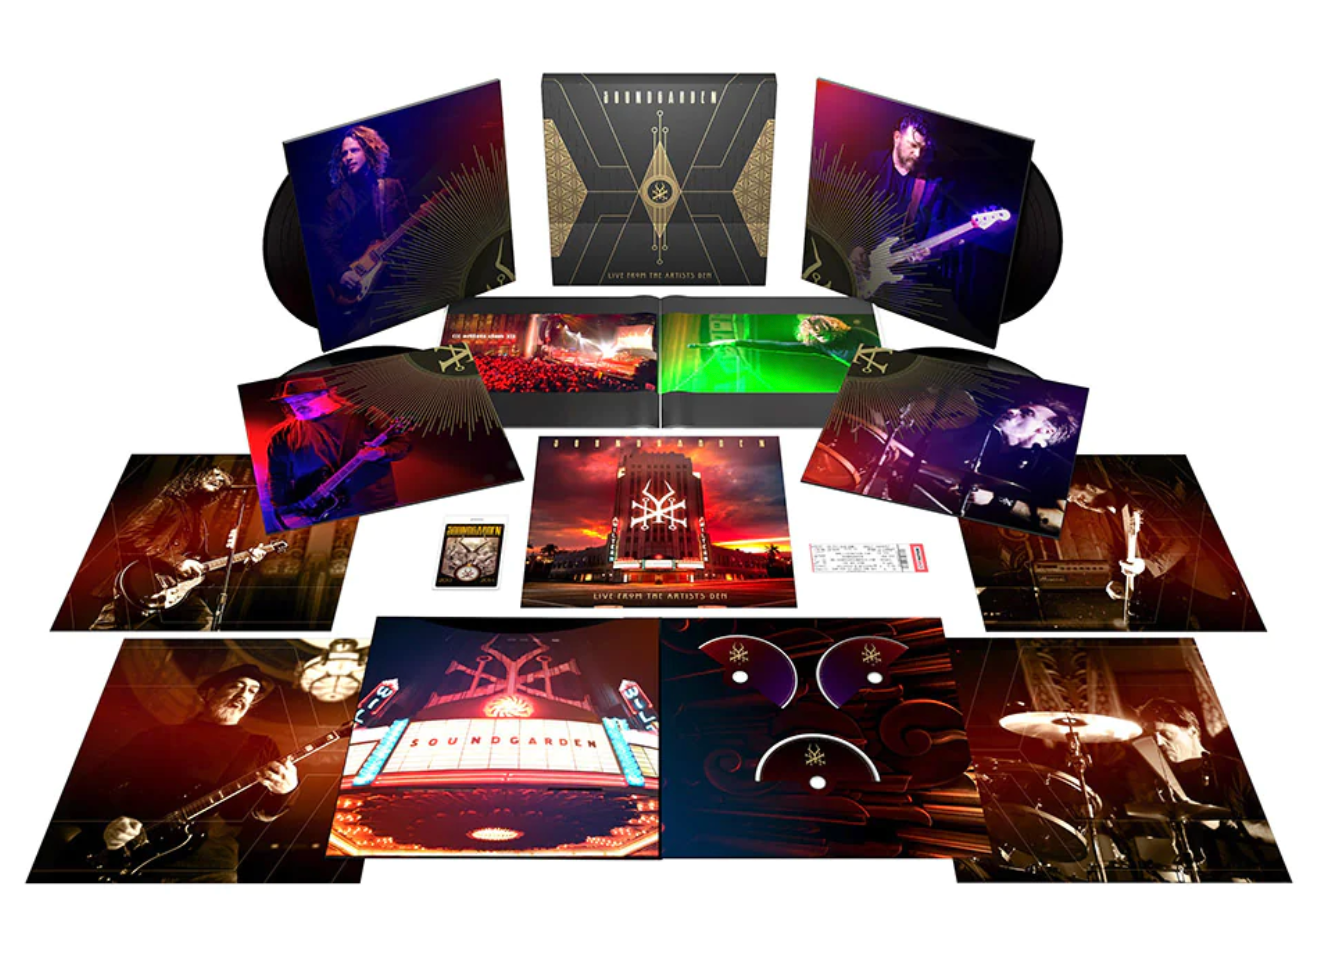 Soundgarden - Live From The Artist's Den (SUPER Deluxe Boxset)[Numbered]